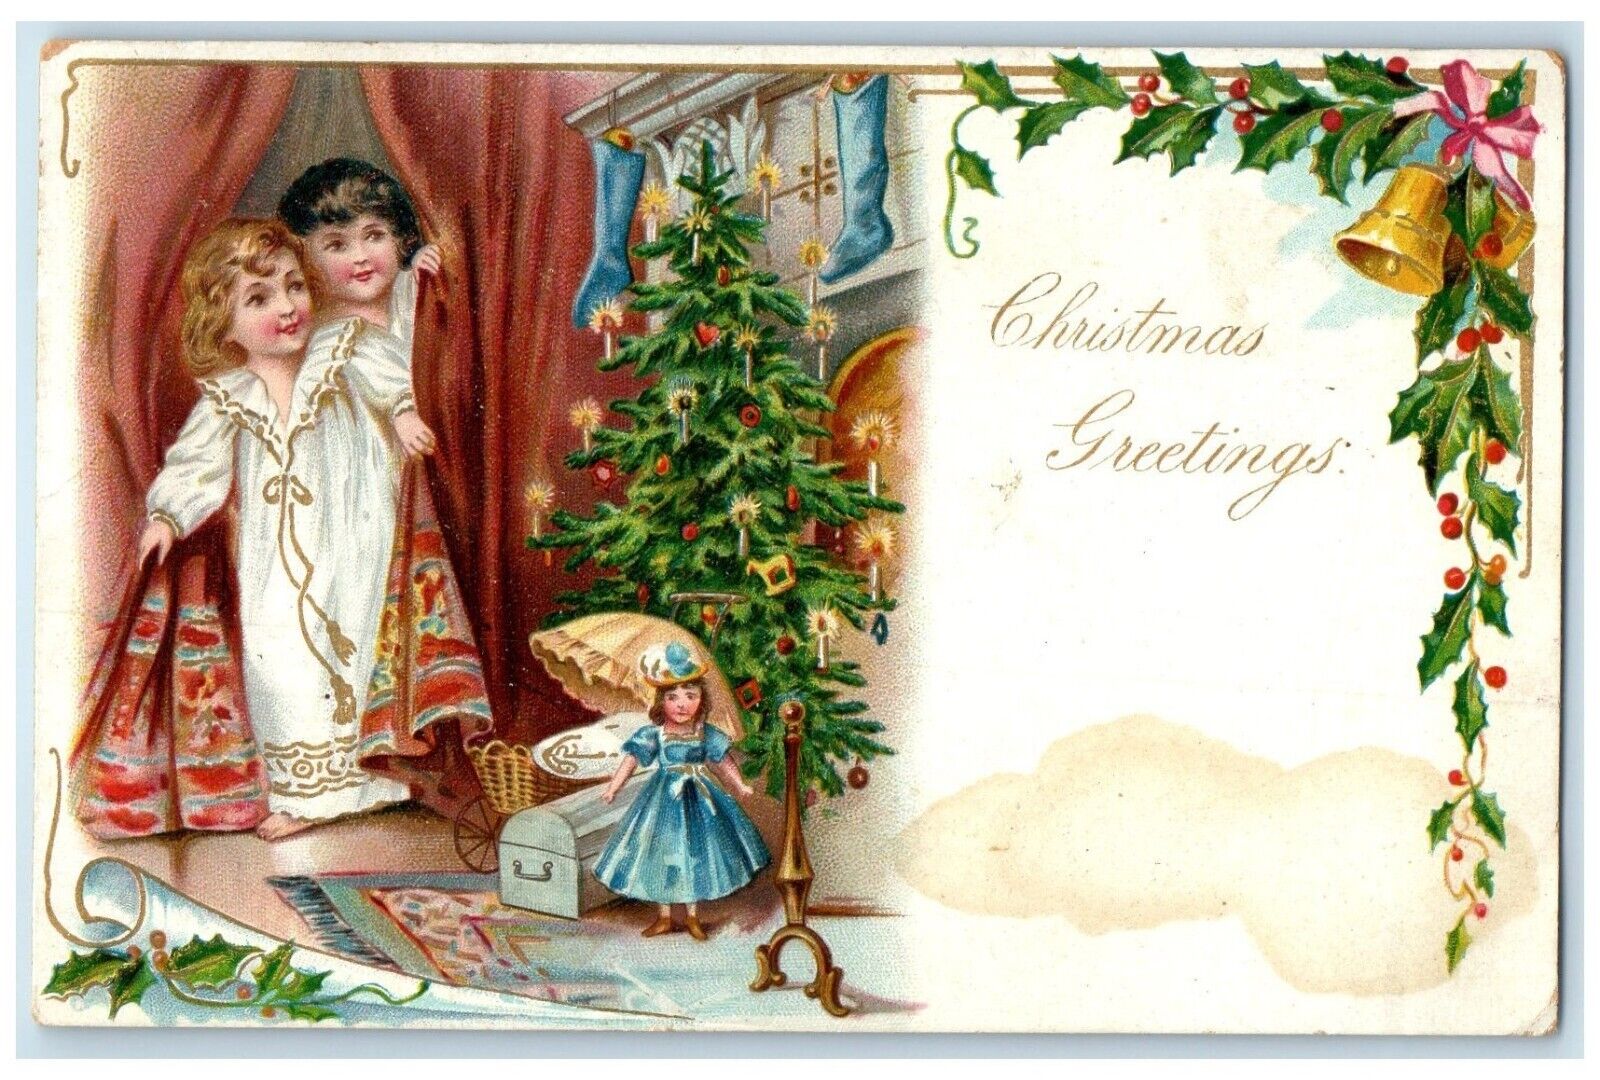 c1905 Christmas Greetings Children Gift Presents Doll Holly Berries Postcard